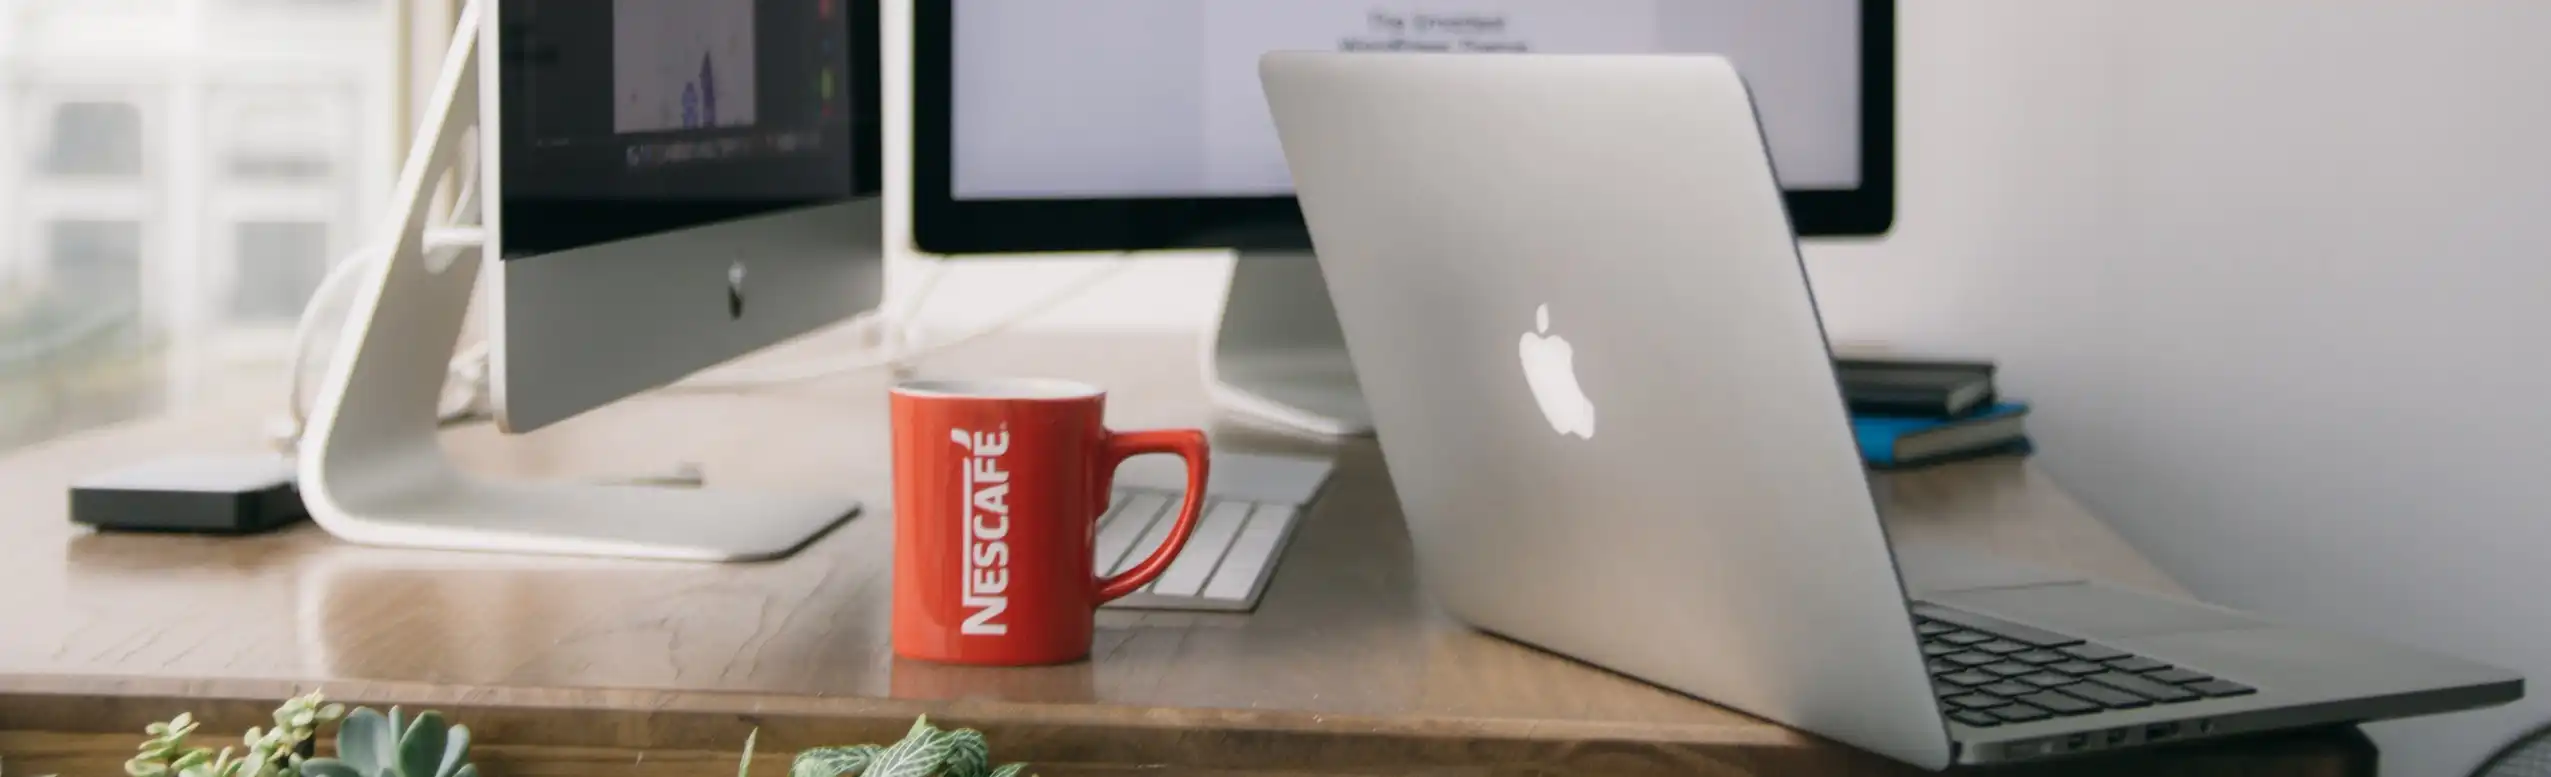 iMac iPhone and Cup of Nescafe